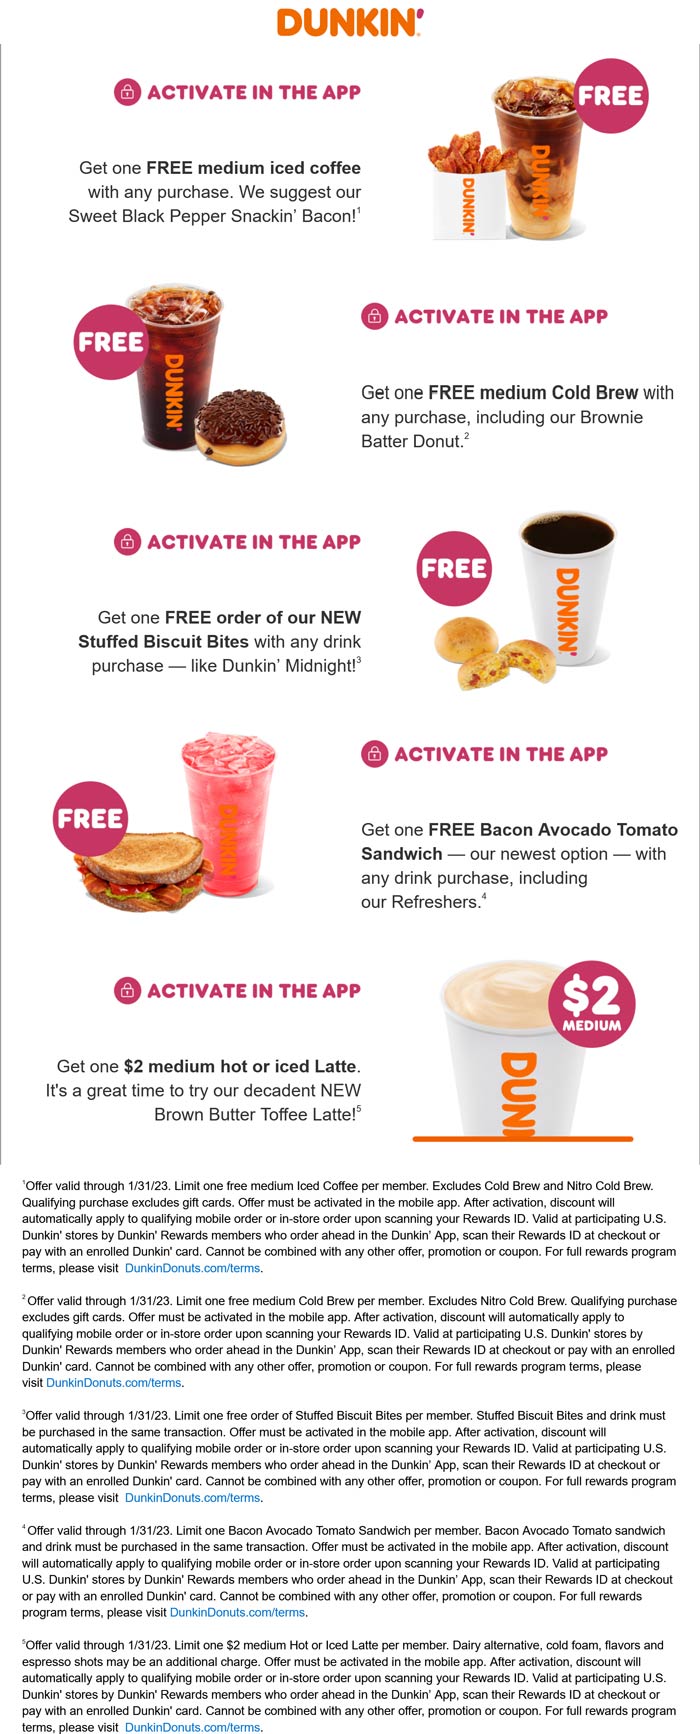 Dunkin Donuts restaurants Coupon  Various free items all month logged in at Dunkin Donuts #dunkindonuts 